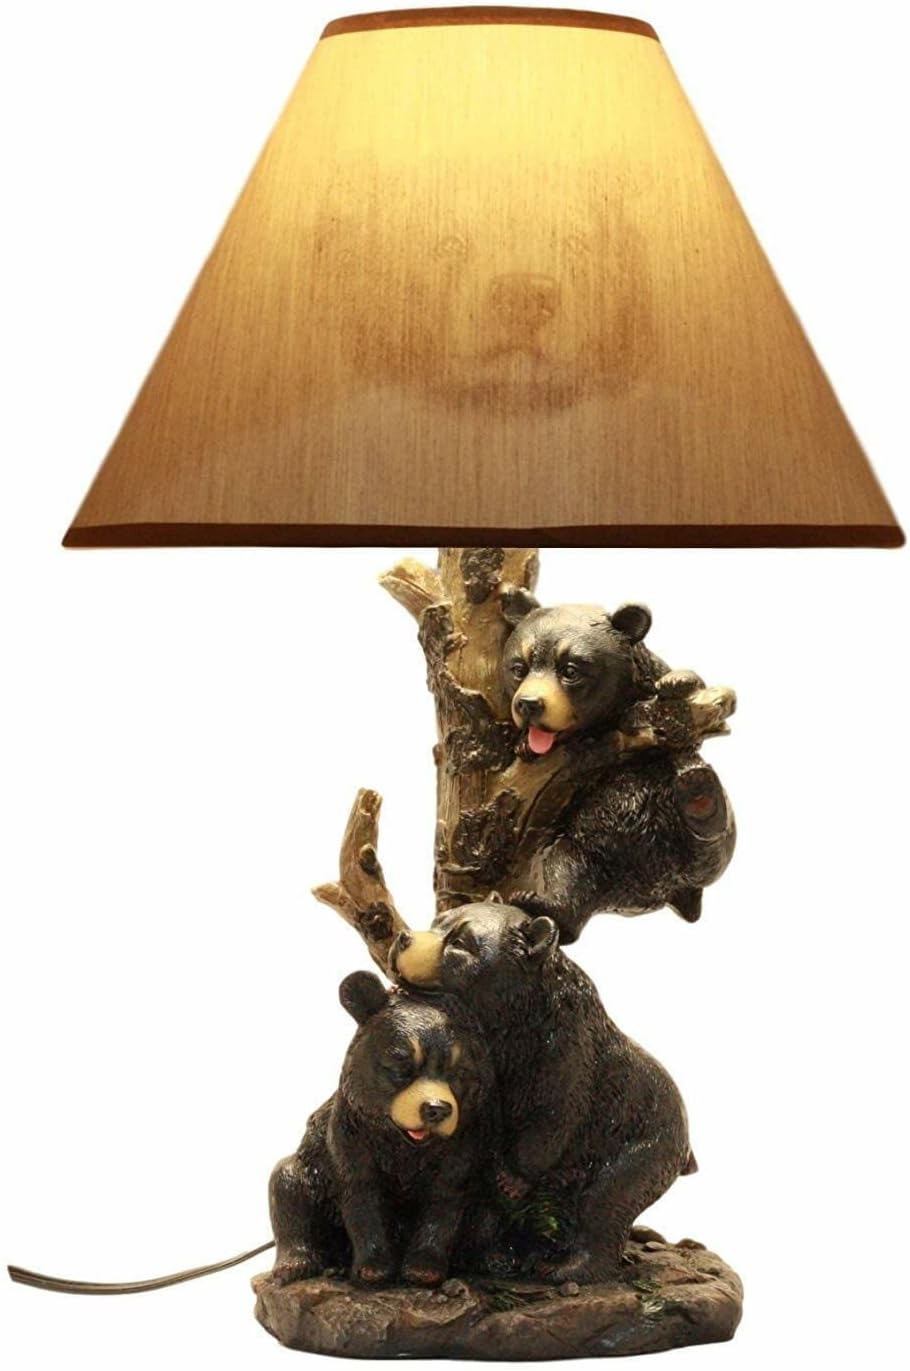 Ebros Wildlife Whimsical Climbing Black Bear Cubs Table Lamp Statue Decor with